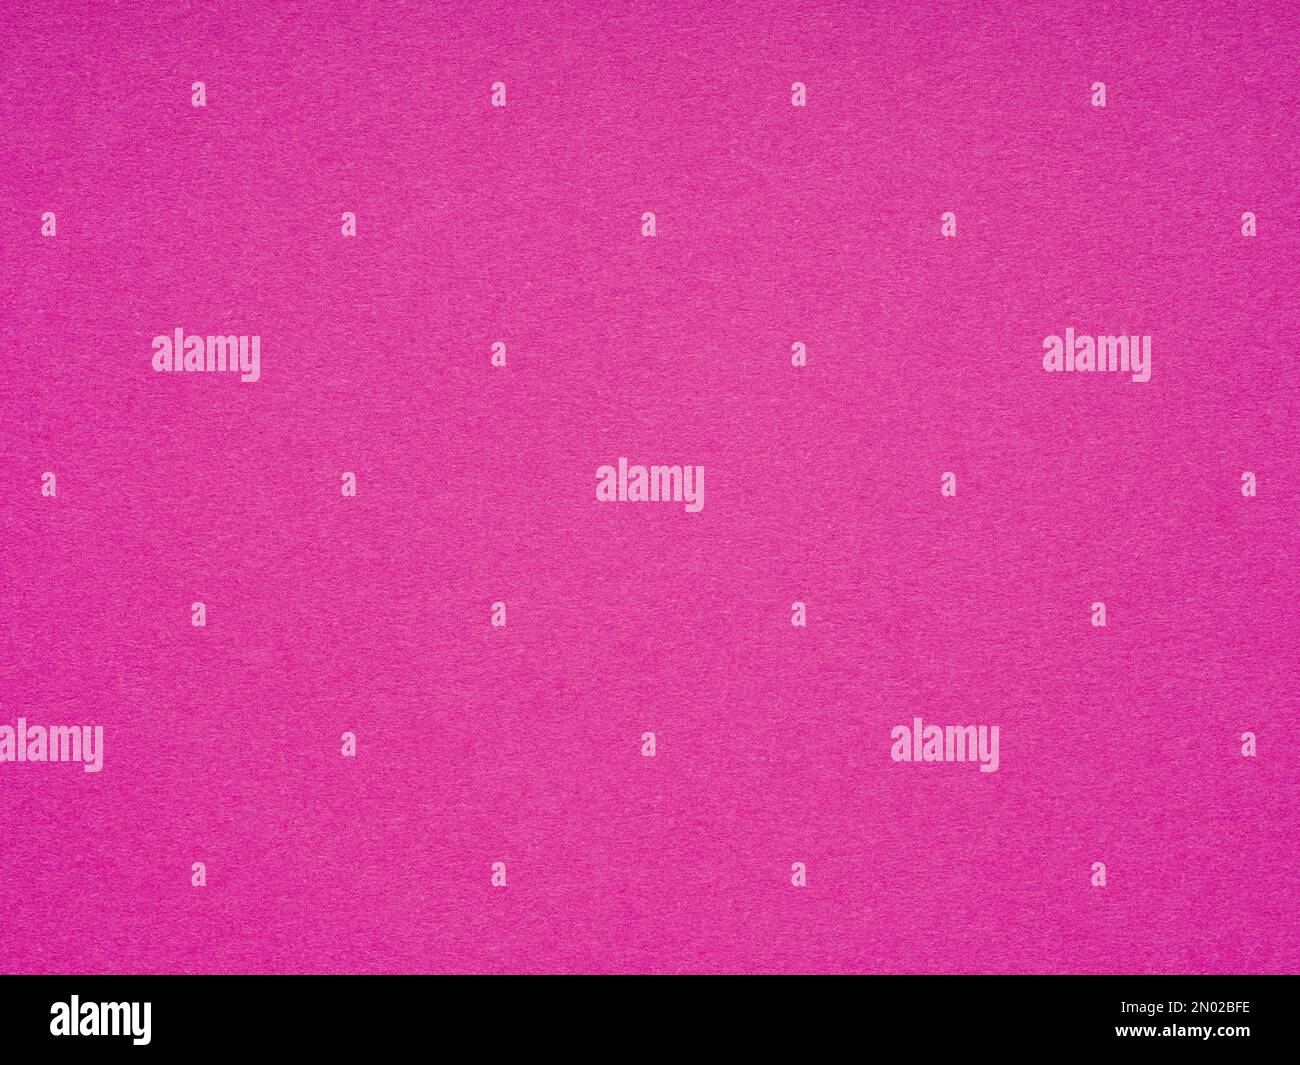 1,918,021 Pink Paper Texture Images, Stock Photos, 3D objects